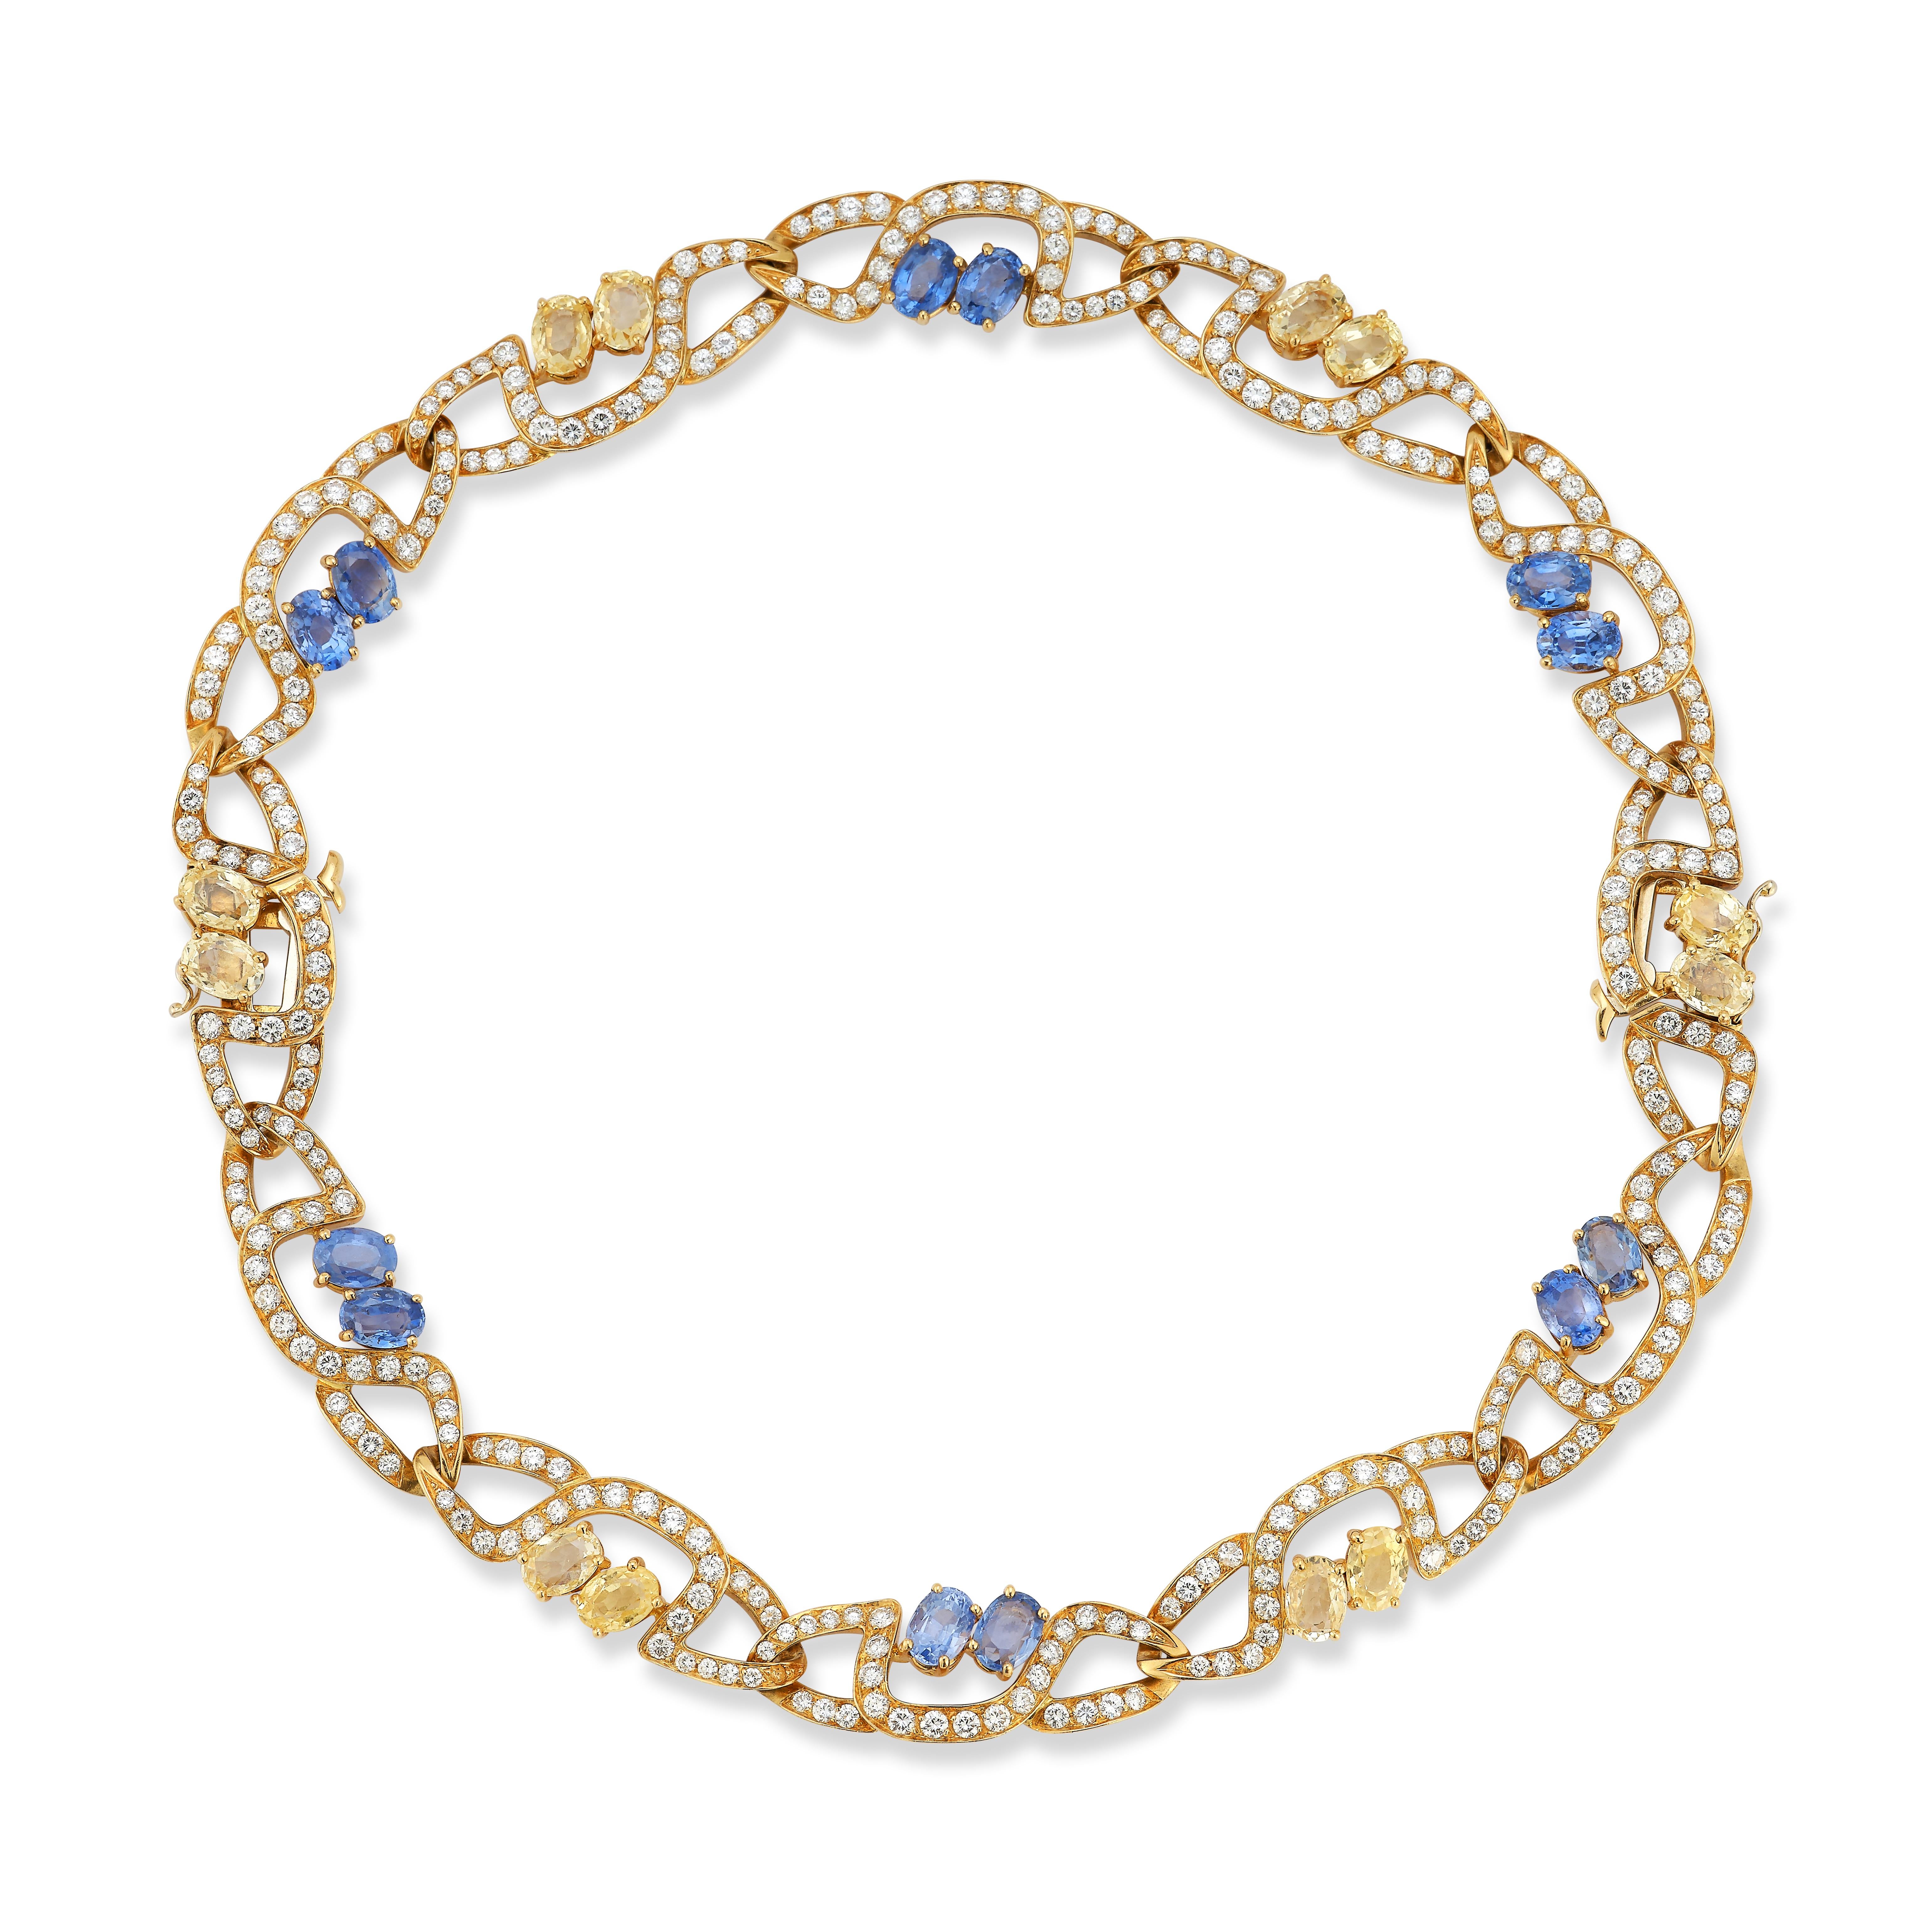 Massoni Sapphire & Diamond Necklace

Converts into two bracelets

18k gold link necklace set with 312 round cut diamonds and 24 blue and yellow sapphires

312 round cut diamonds, approximate total weight of 12.32ct

12 blue oval sapphires,